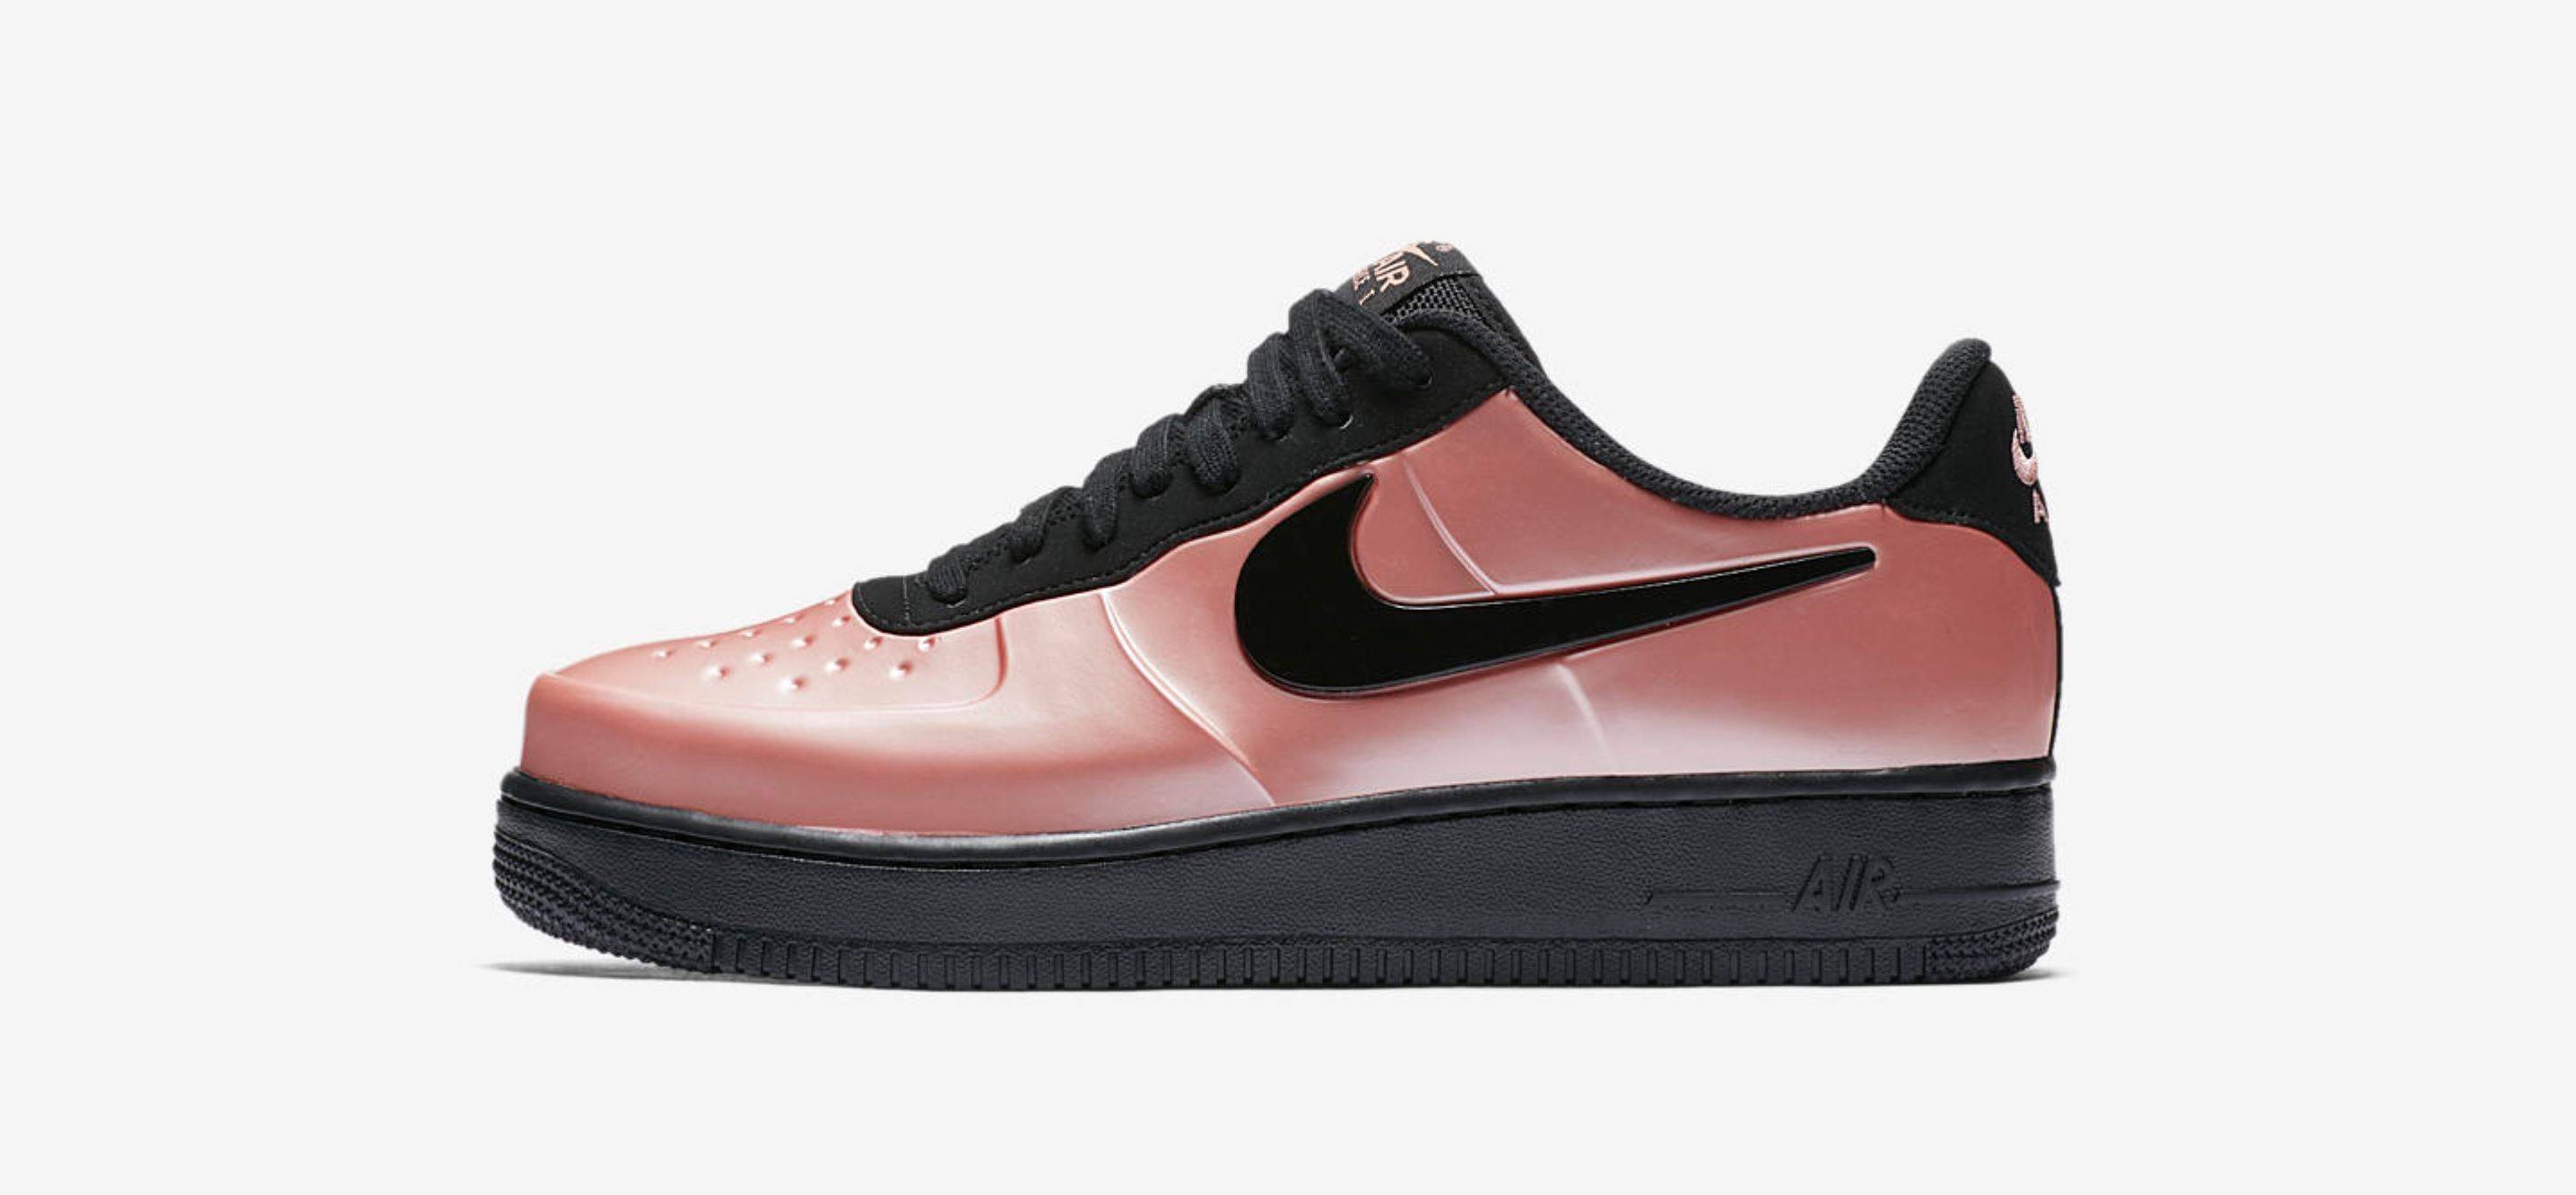 The Nike Air Force 1 Foamposite Pro Cup Drops Tomorrow - WearTesters